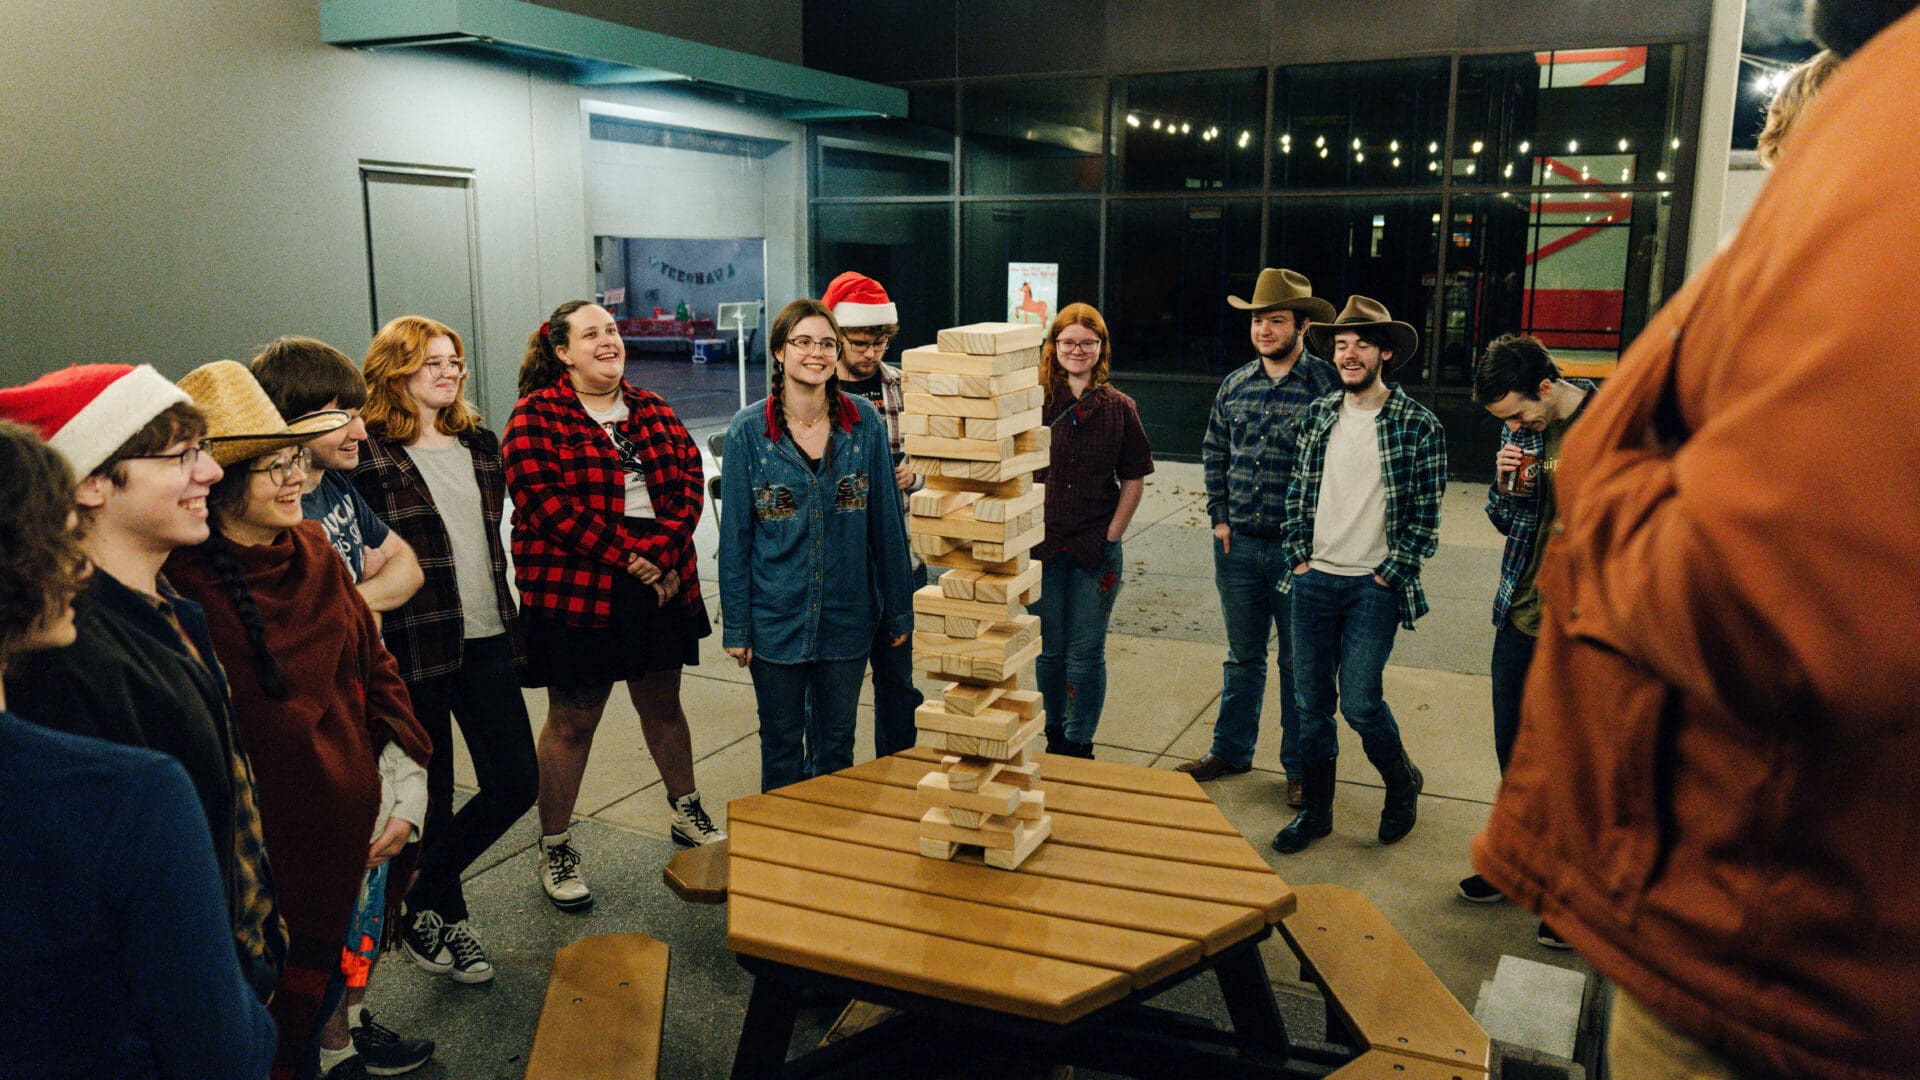 A group of people standing around a table with a tower made out of pizza boxes.